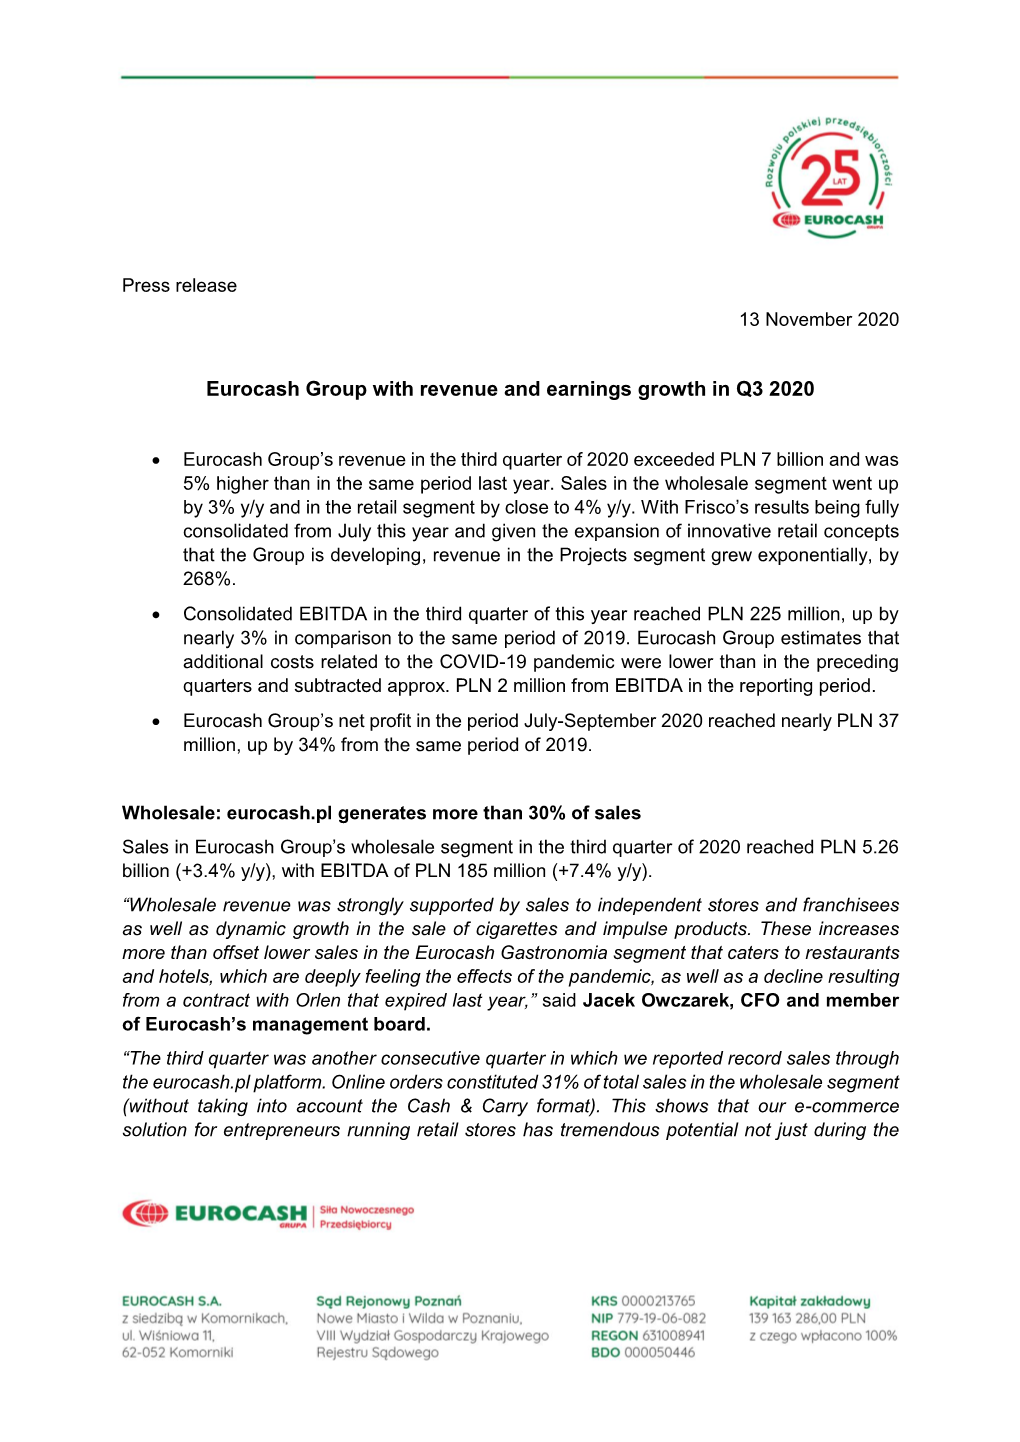 Eurocash Group with Revenue and Earnings Growth in Q3 2020